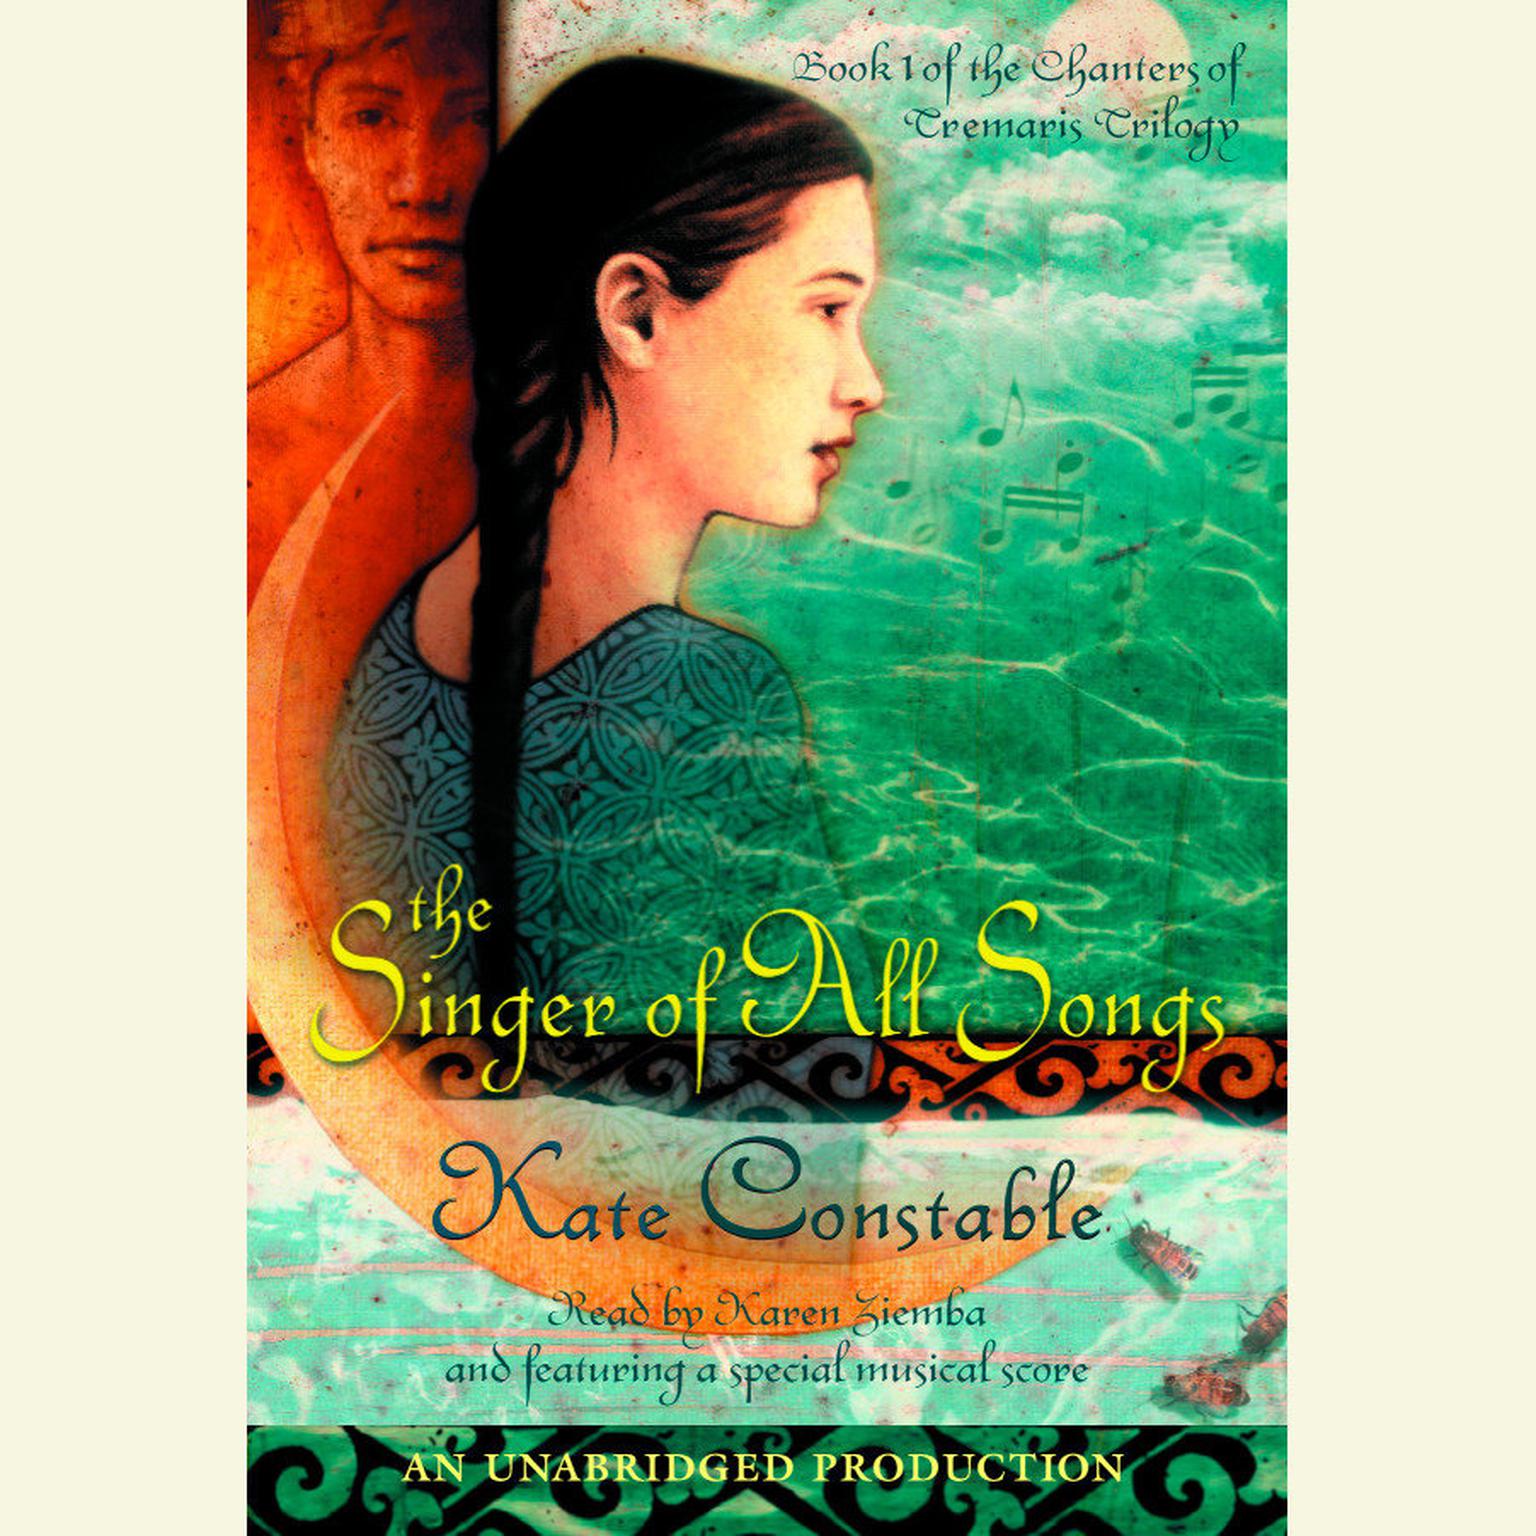 The Singer of All Songs: Book 1 of the Chanters of Tremaris Trilogy Audiobook, by Kate Constable